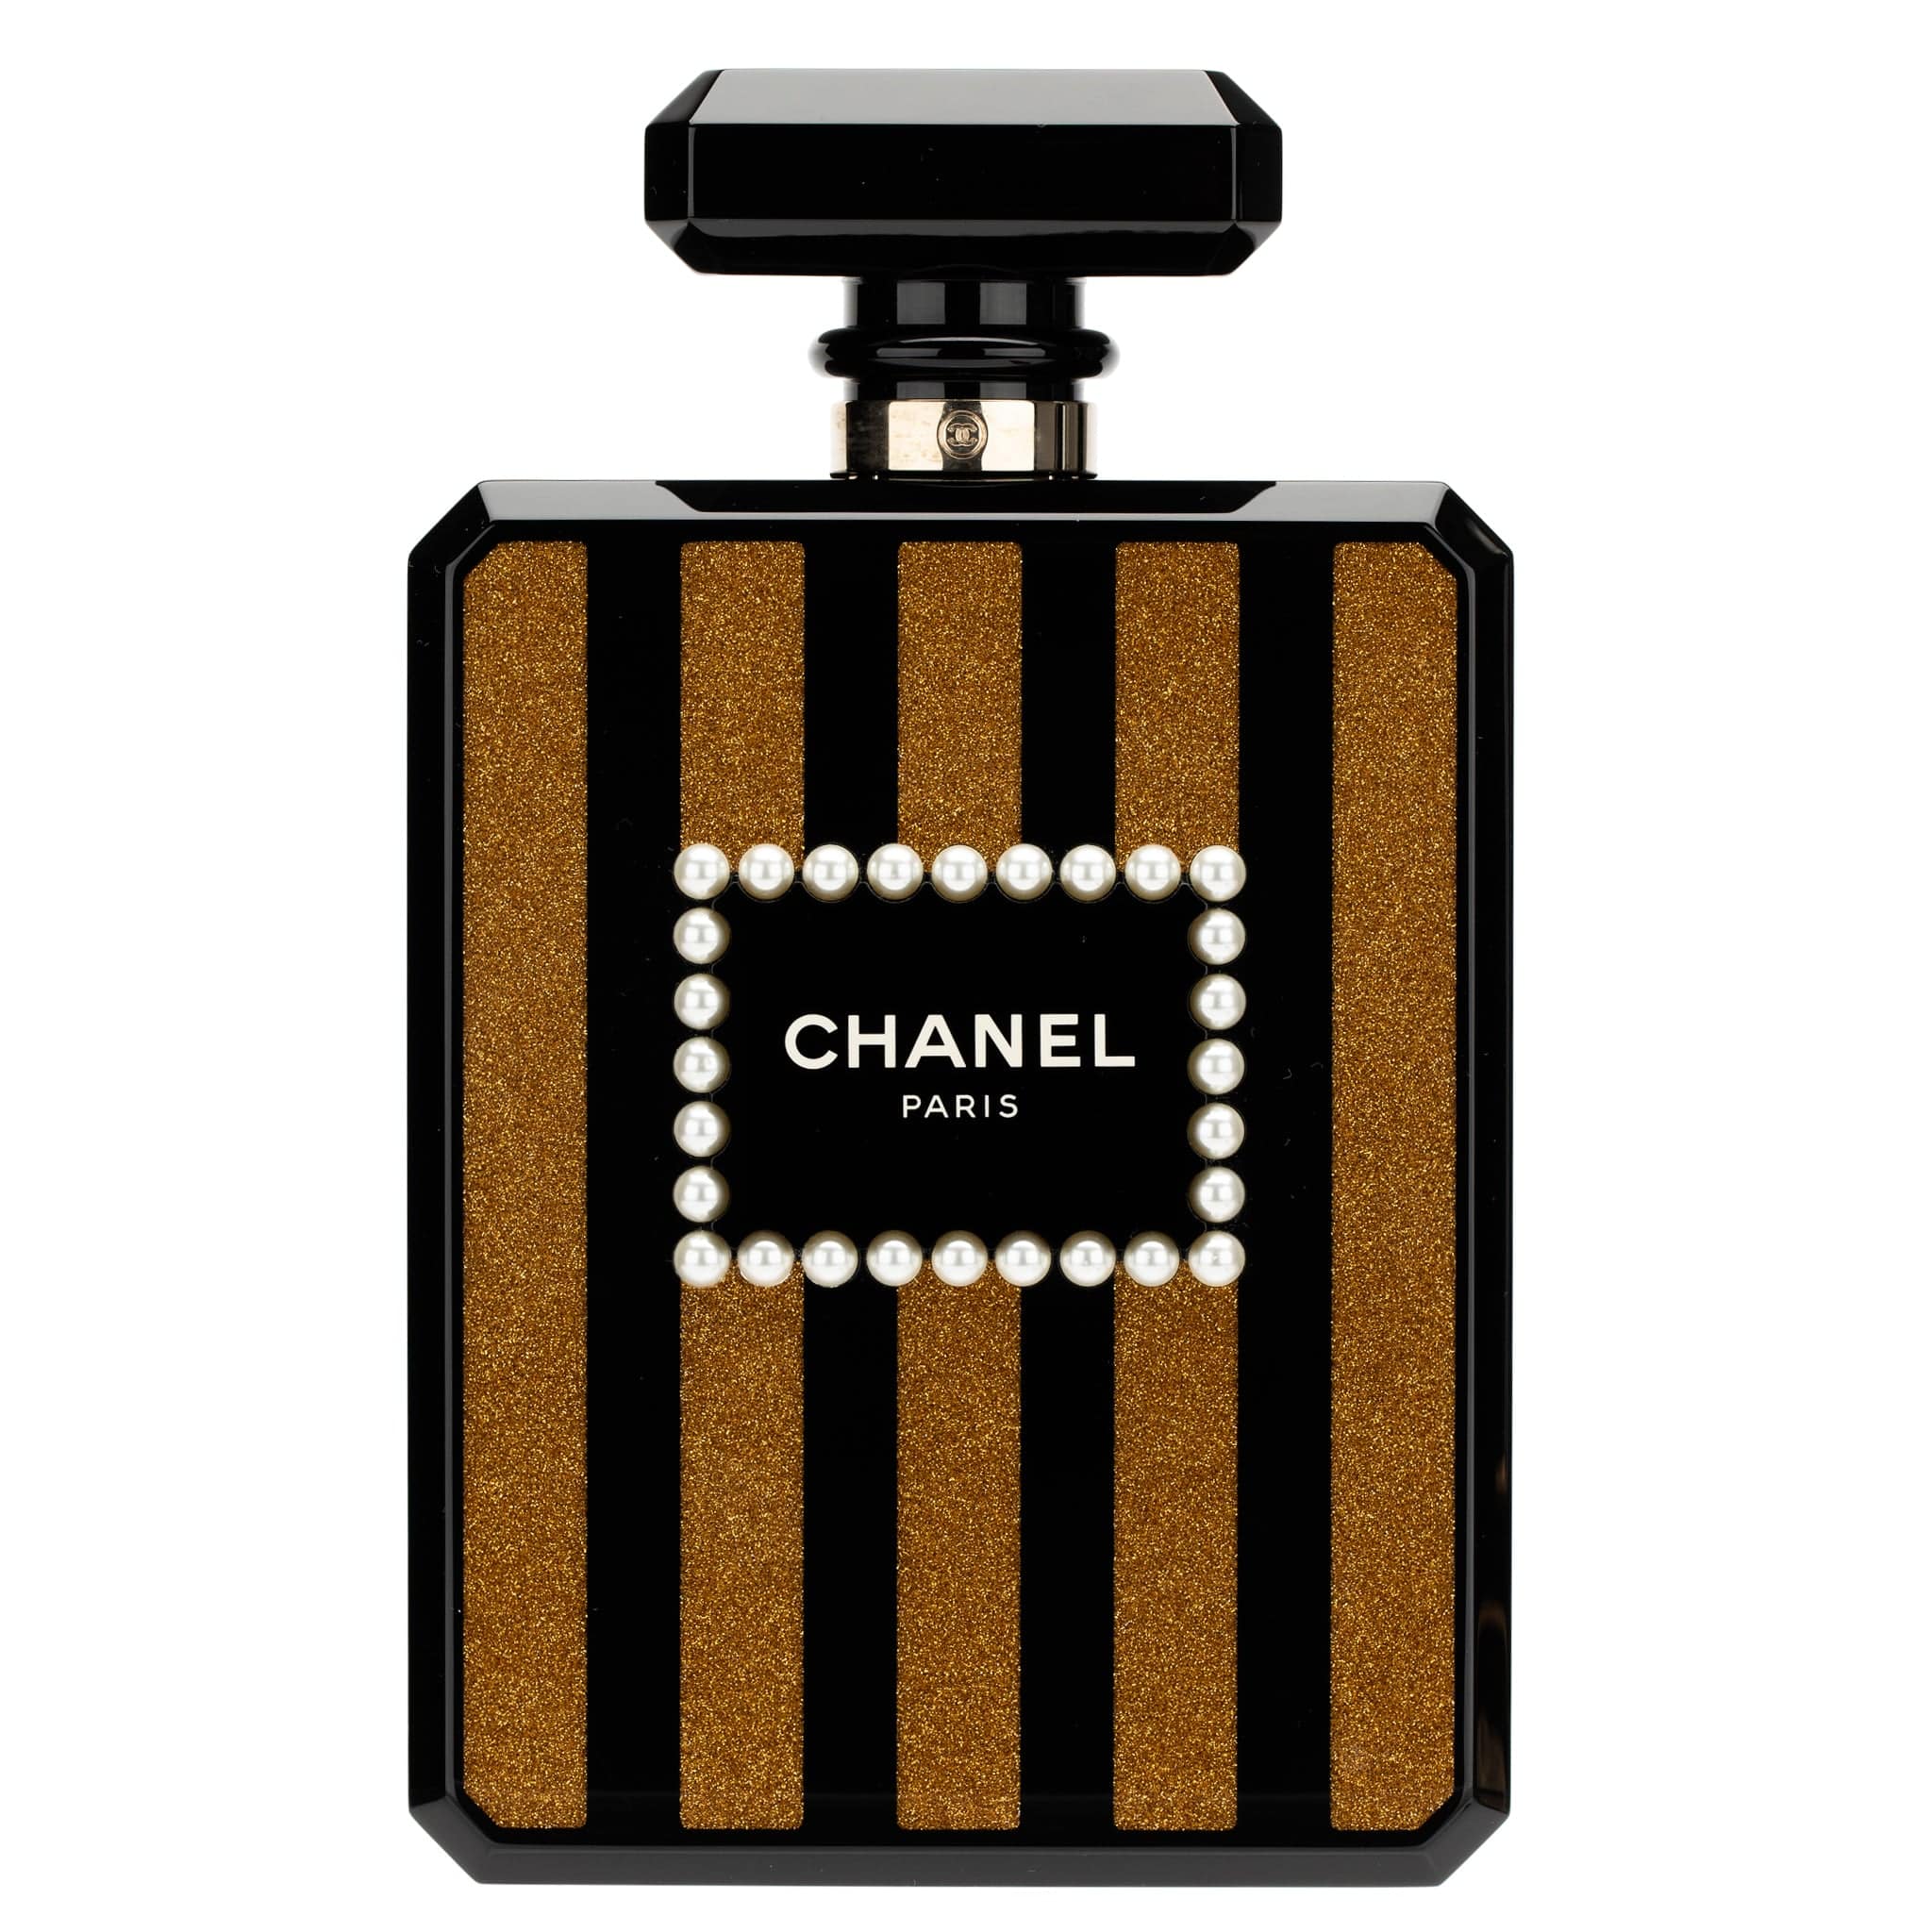 CHANEL MINAUDIÈRE LIMITED EDITION LUCITE PERFUME BOTTLE BLACK, GOLD GLITTER & PEARLS GOLD HARDWARE - On Repeat